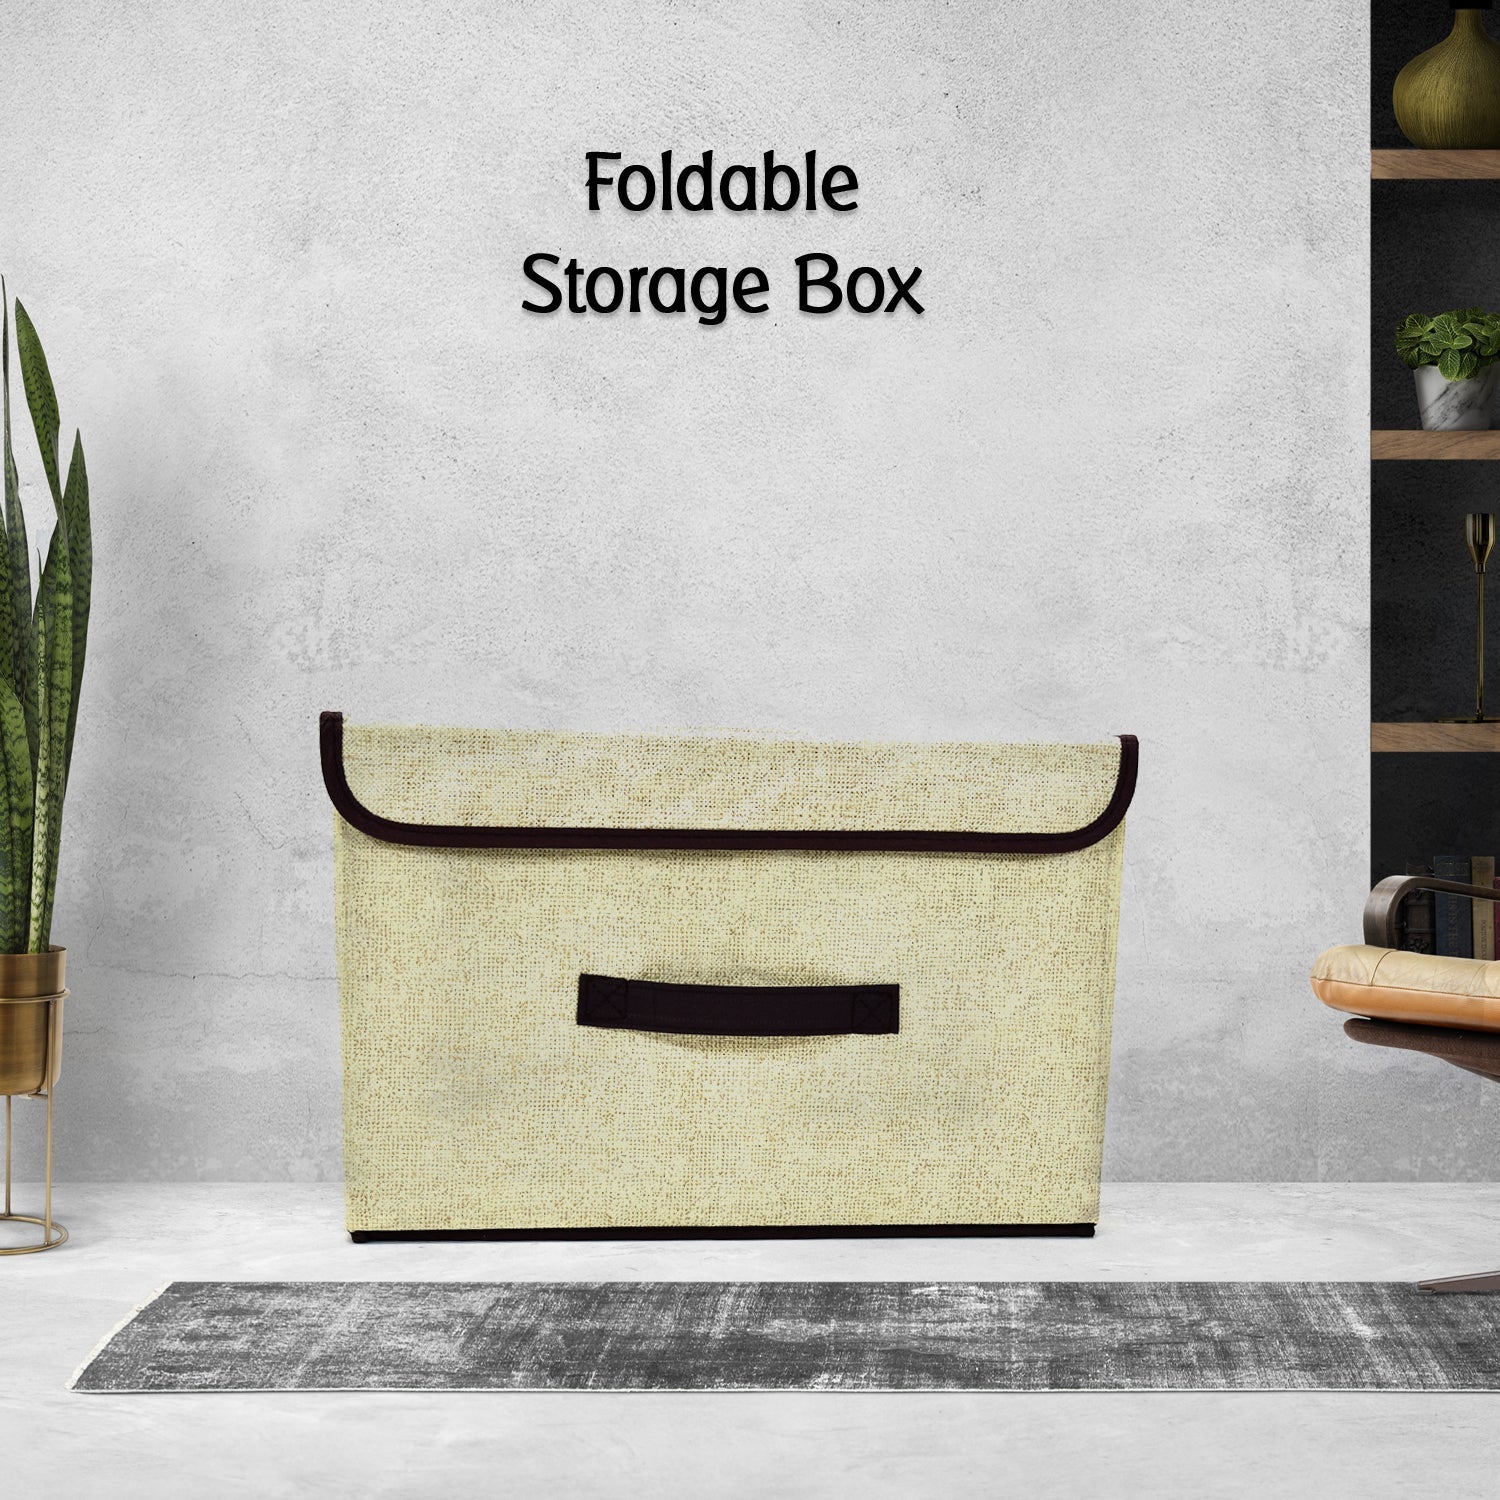 6470 Foldable Storage Box with Lid and Handles, Cotton and Linen Storage Bins and Baskets Organizer for Nursery, Closet, Bedroom, Home 